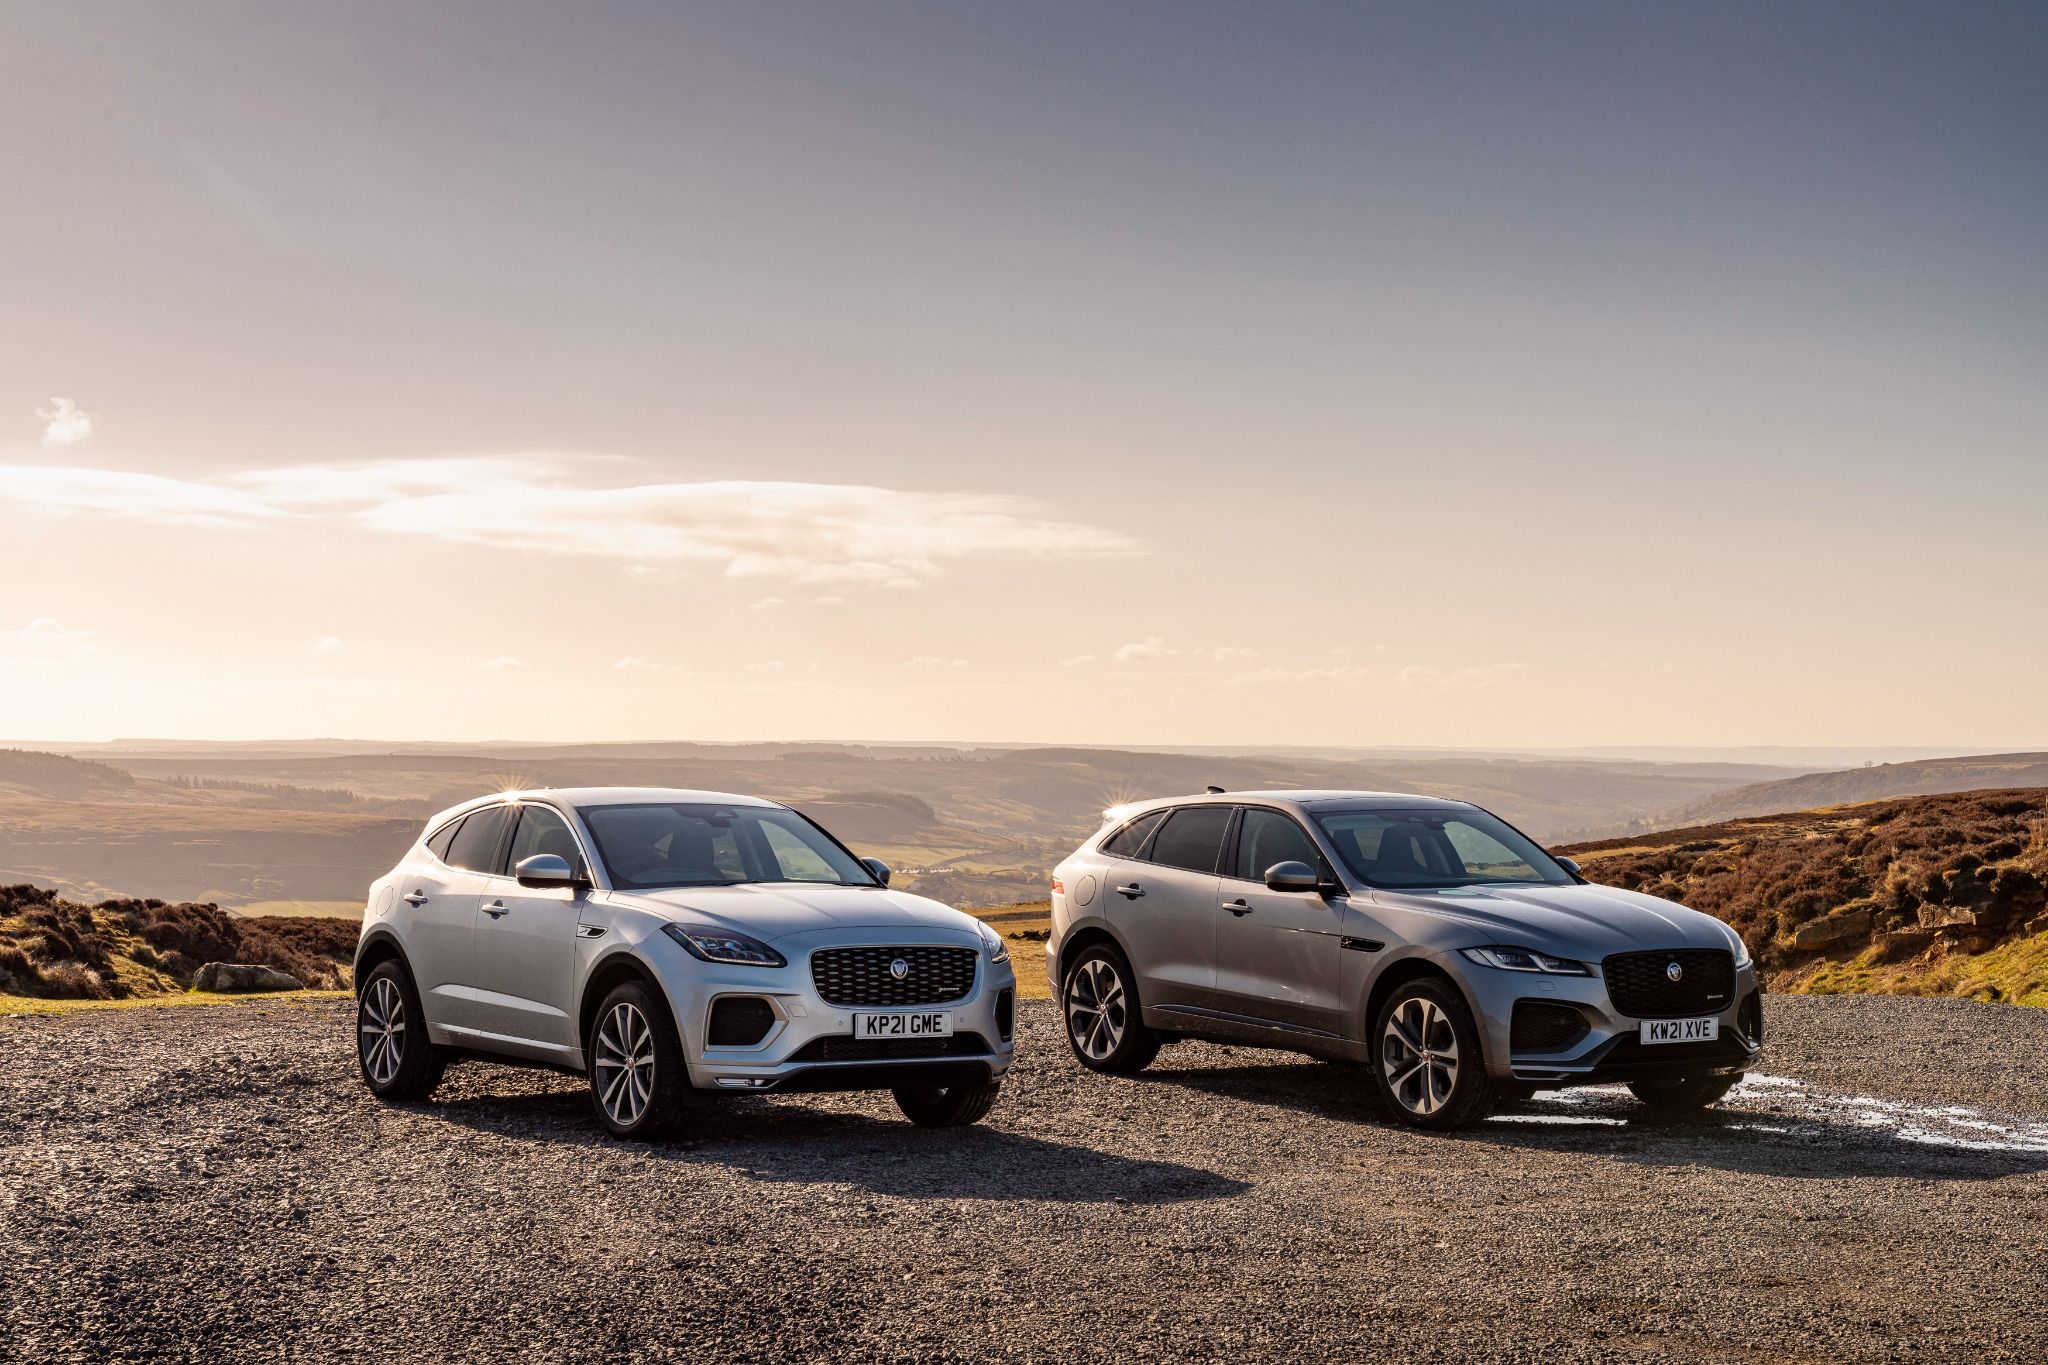 What's the difference between the E-Pace and F-Pace?